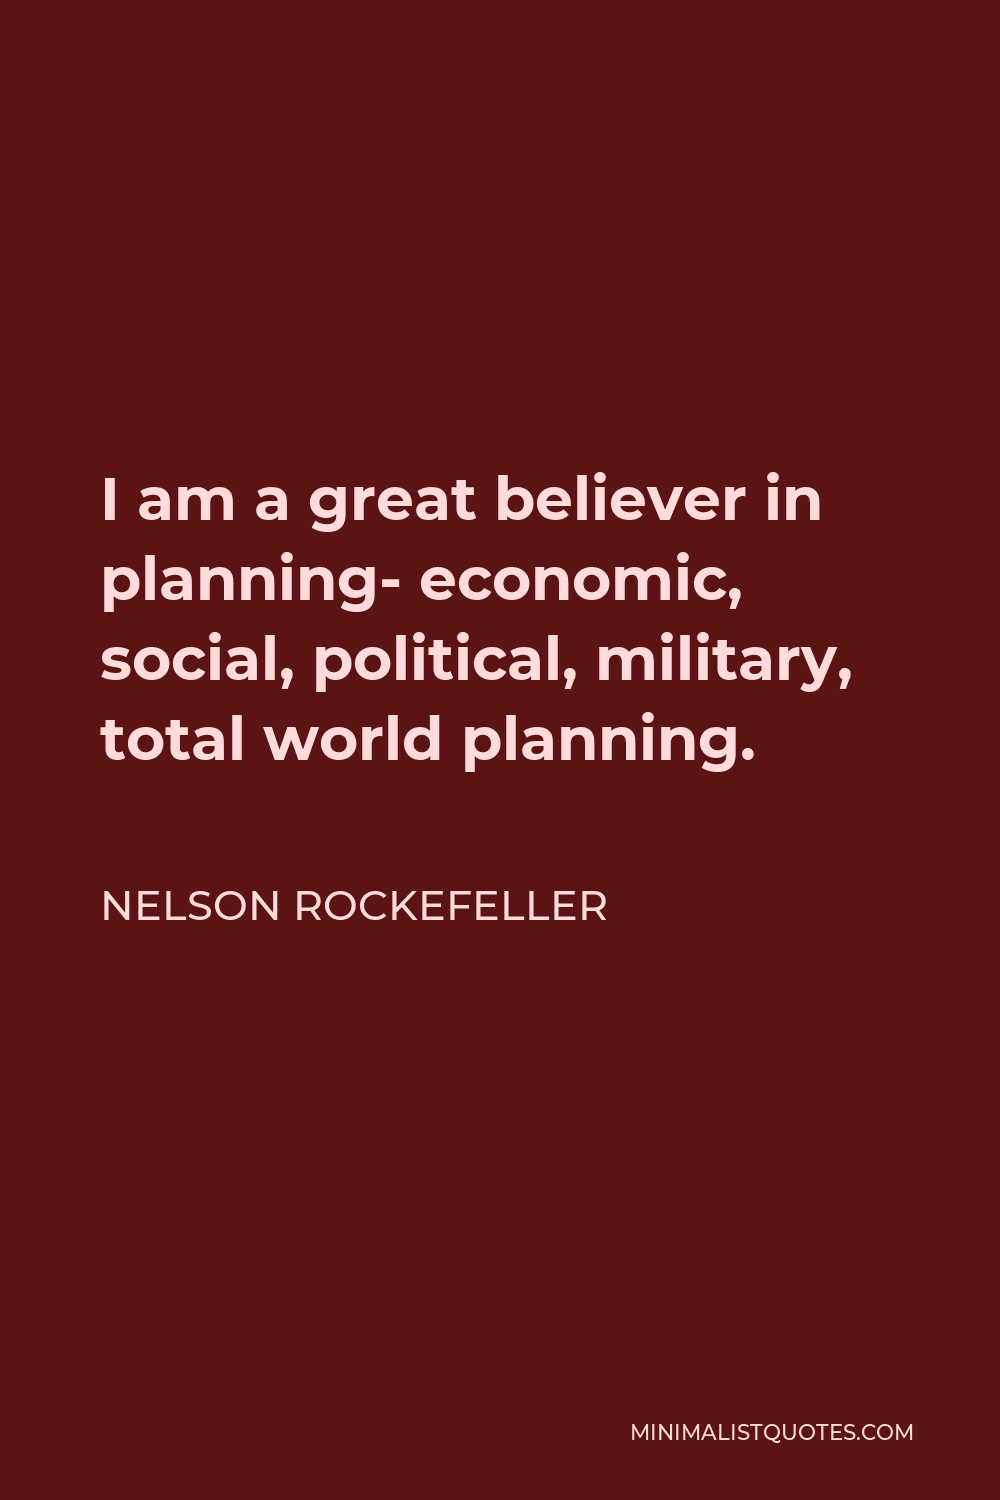 Nelson Rockefeller Quote - I am a great believer in planning- economic, social, political, military, total world planning.